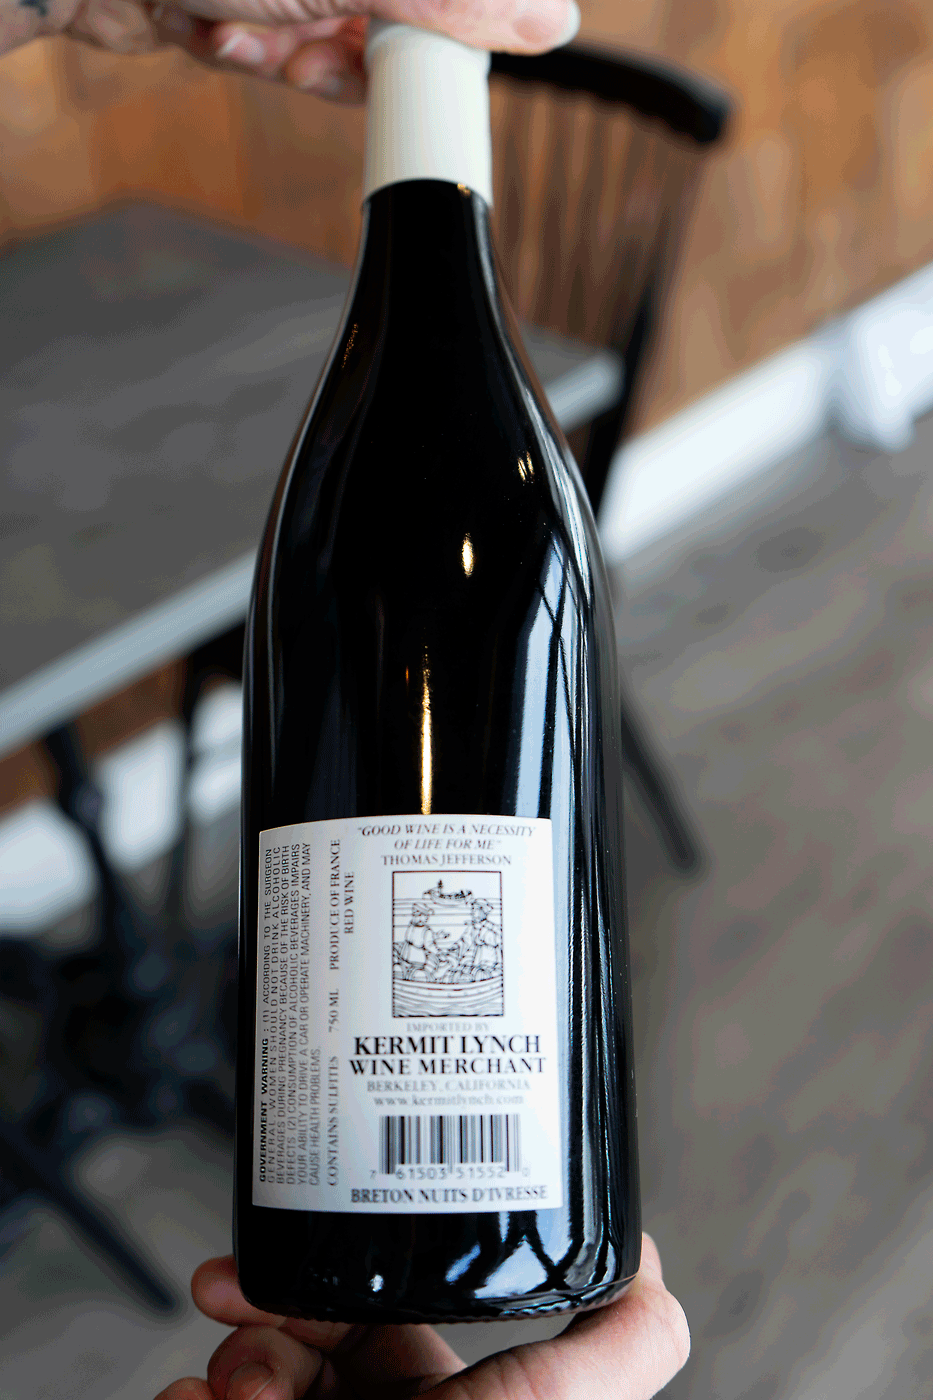 where to find importer information on a wine bottle